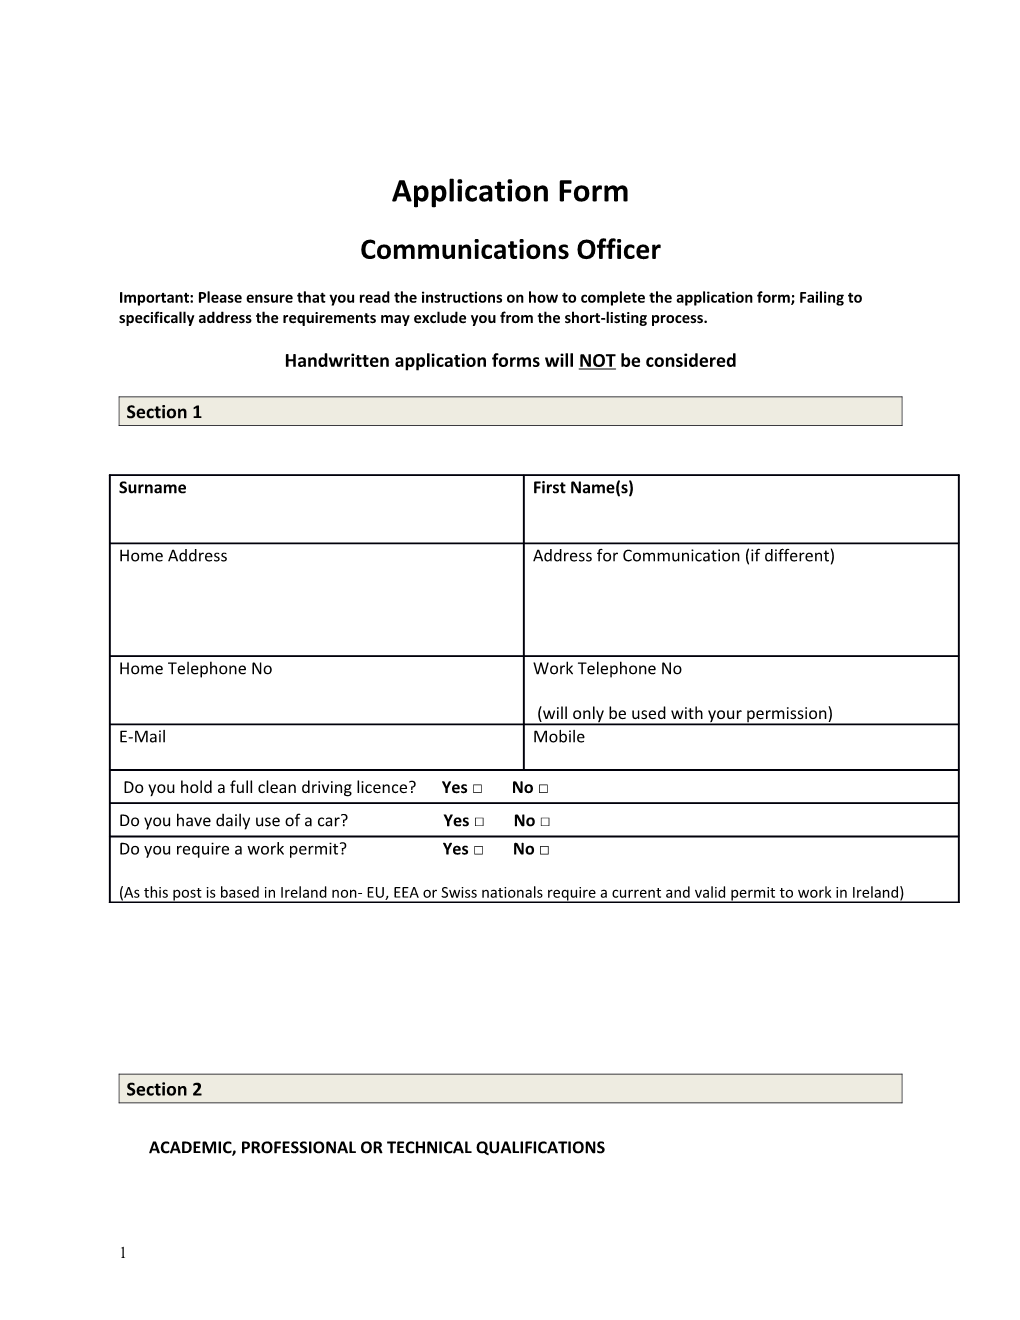 Handwritten Application Forms Will NOT Be Considered